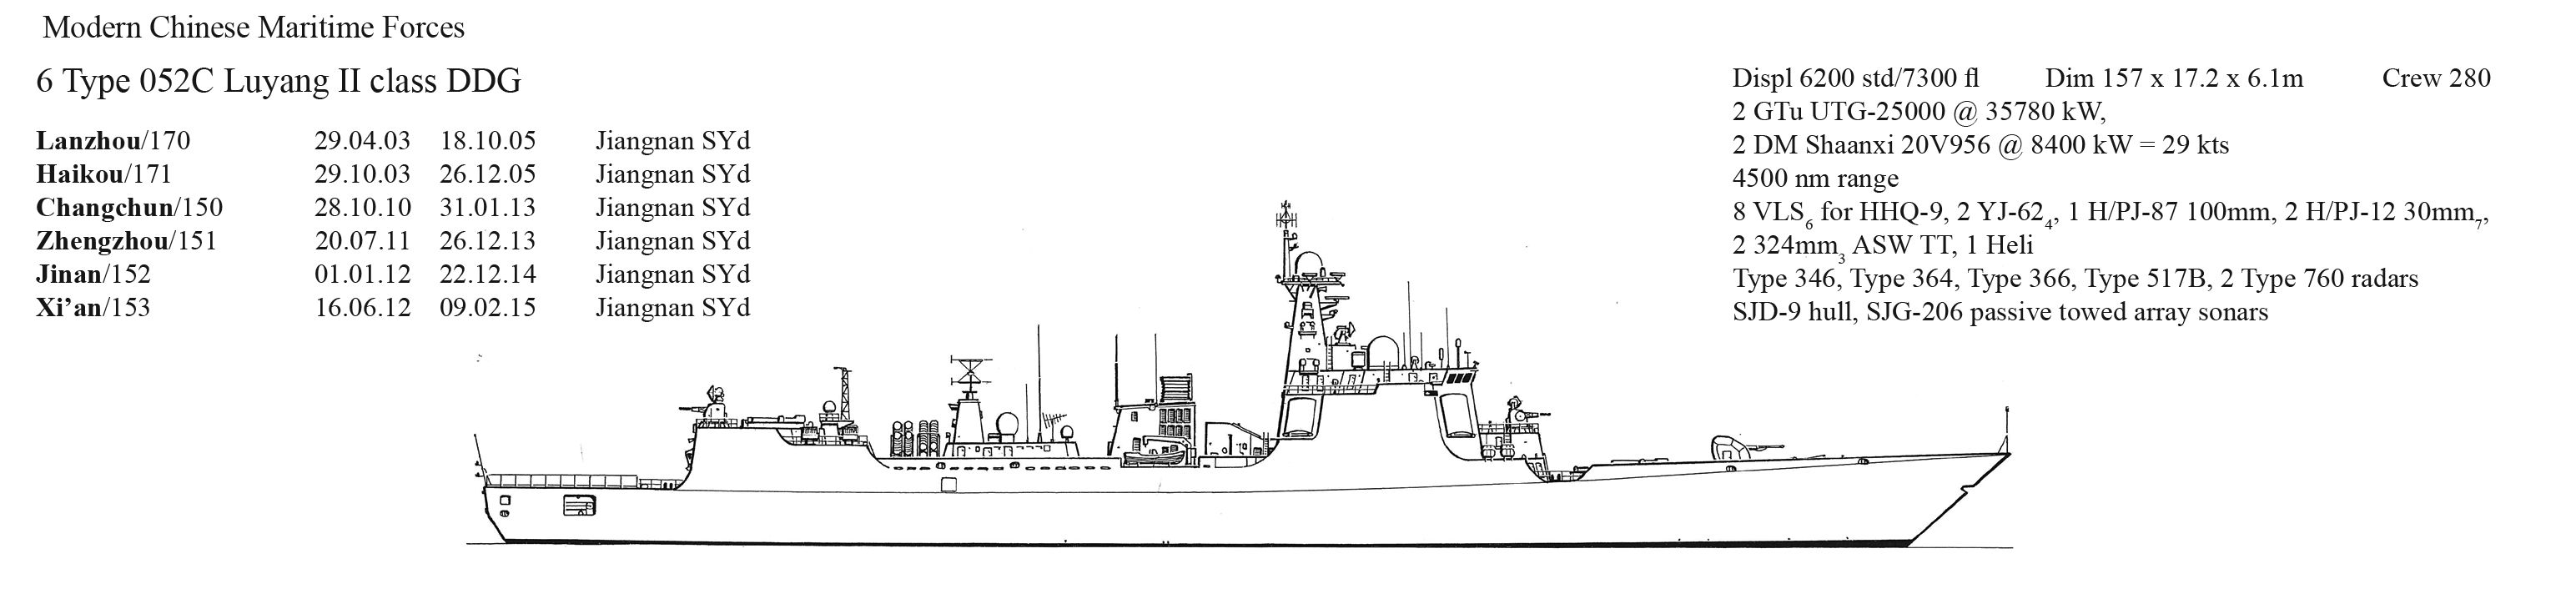 MCMF Data for the Type 52C DDG